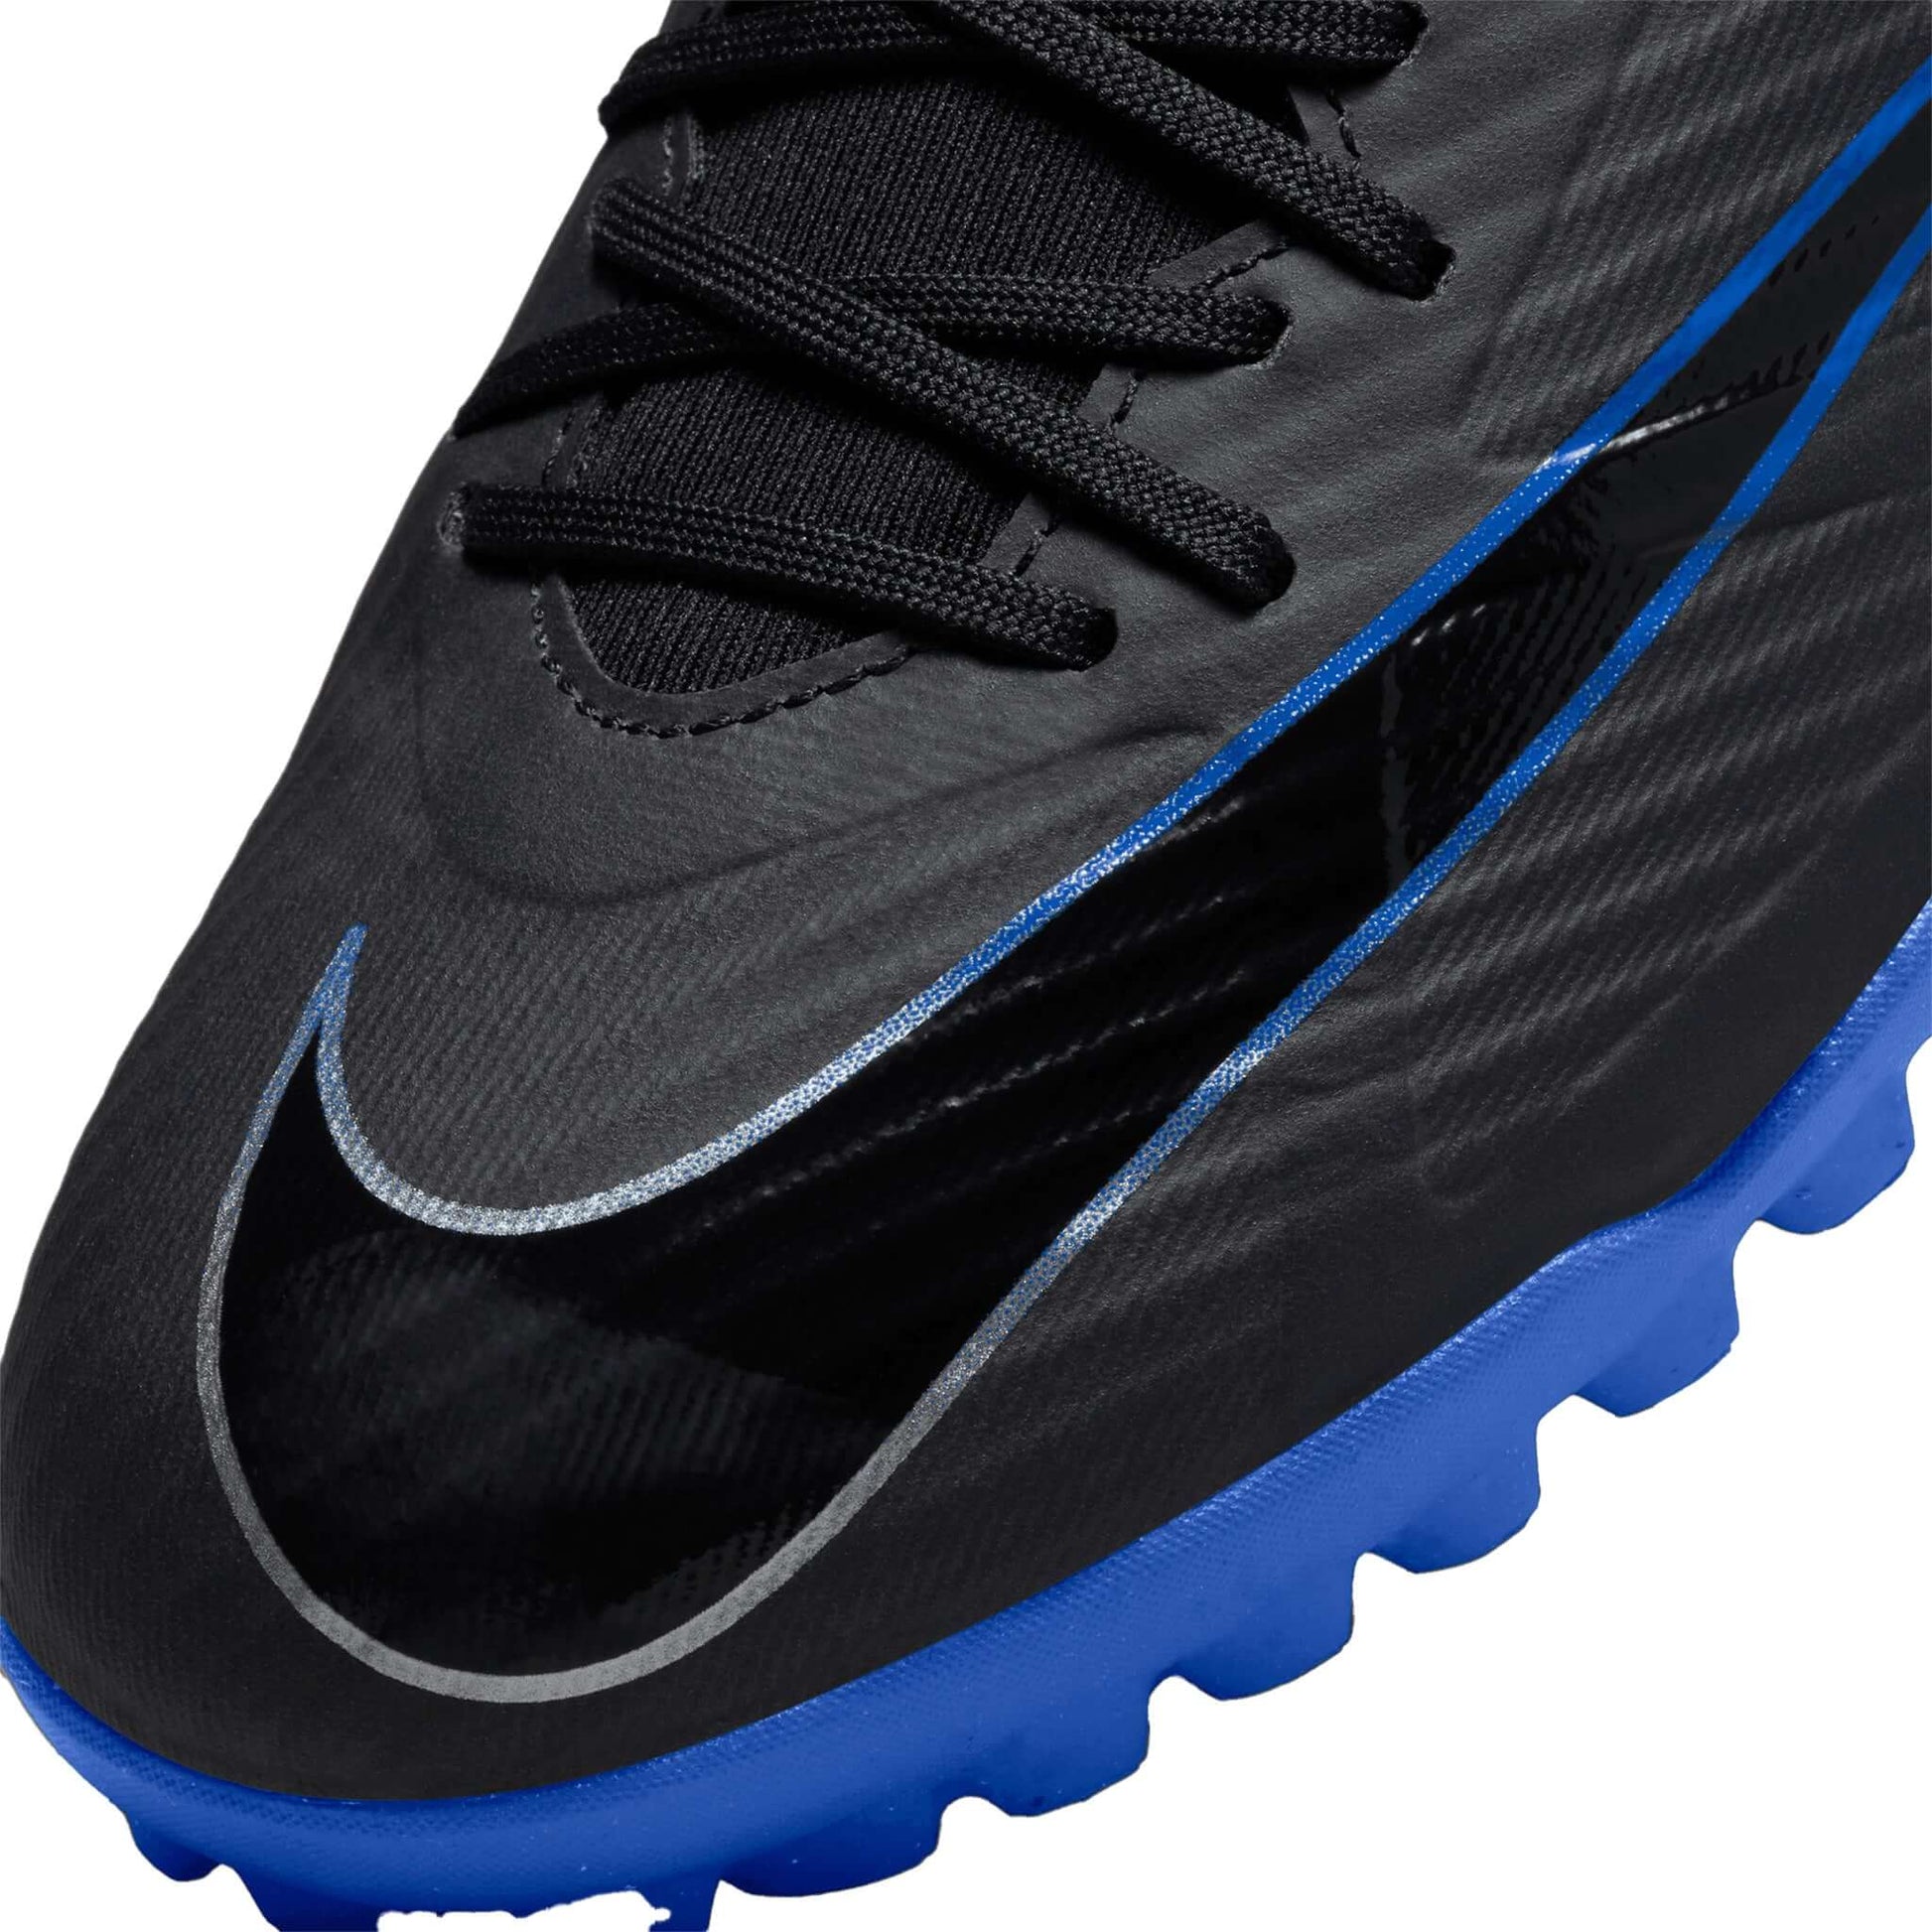 Mercurial Superfly 9 Academy Turf Soccer Shoes | EvangelistaSports.com | Canada's Premiere Soccer Store